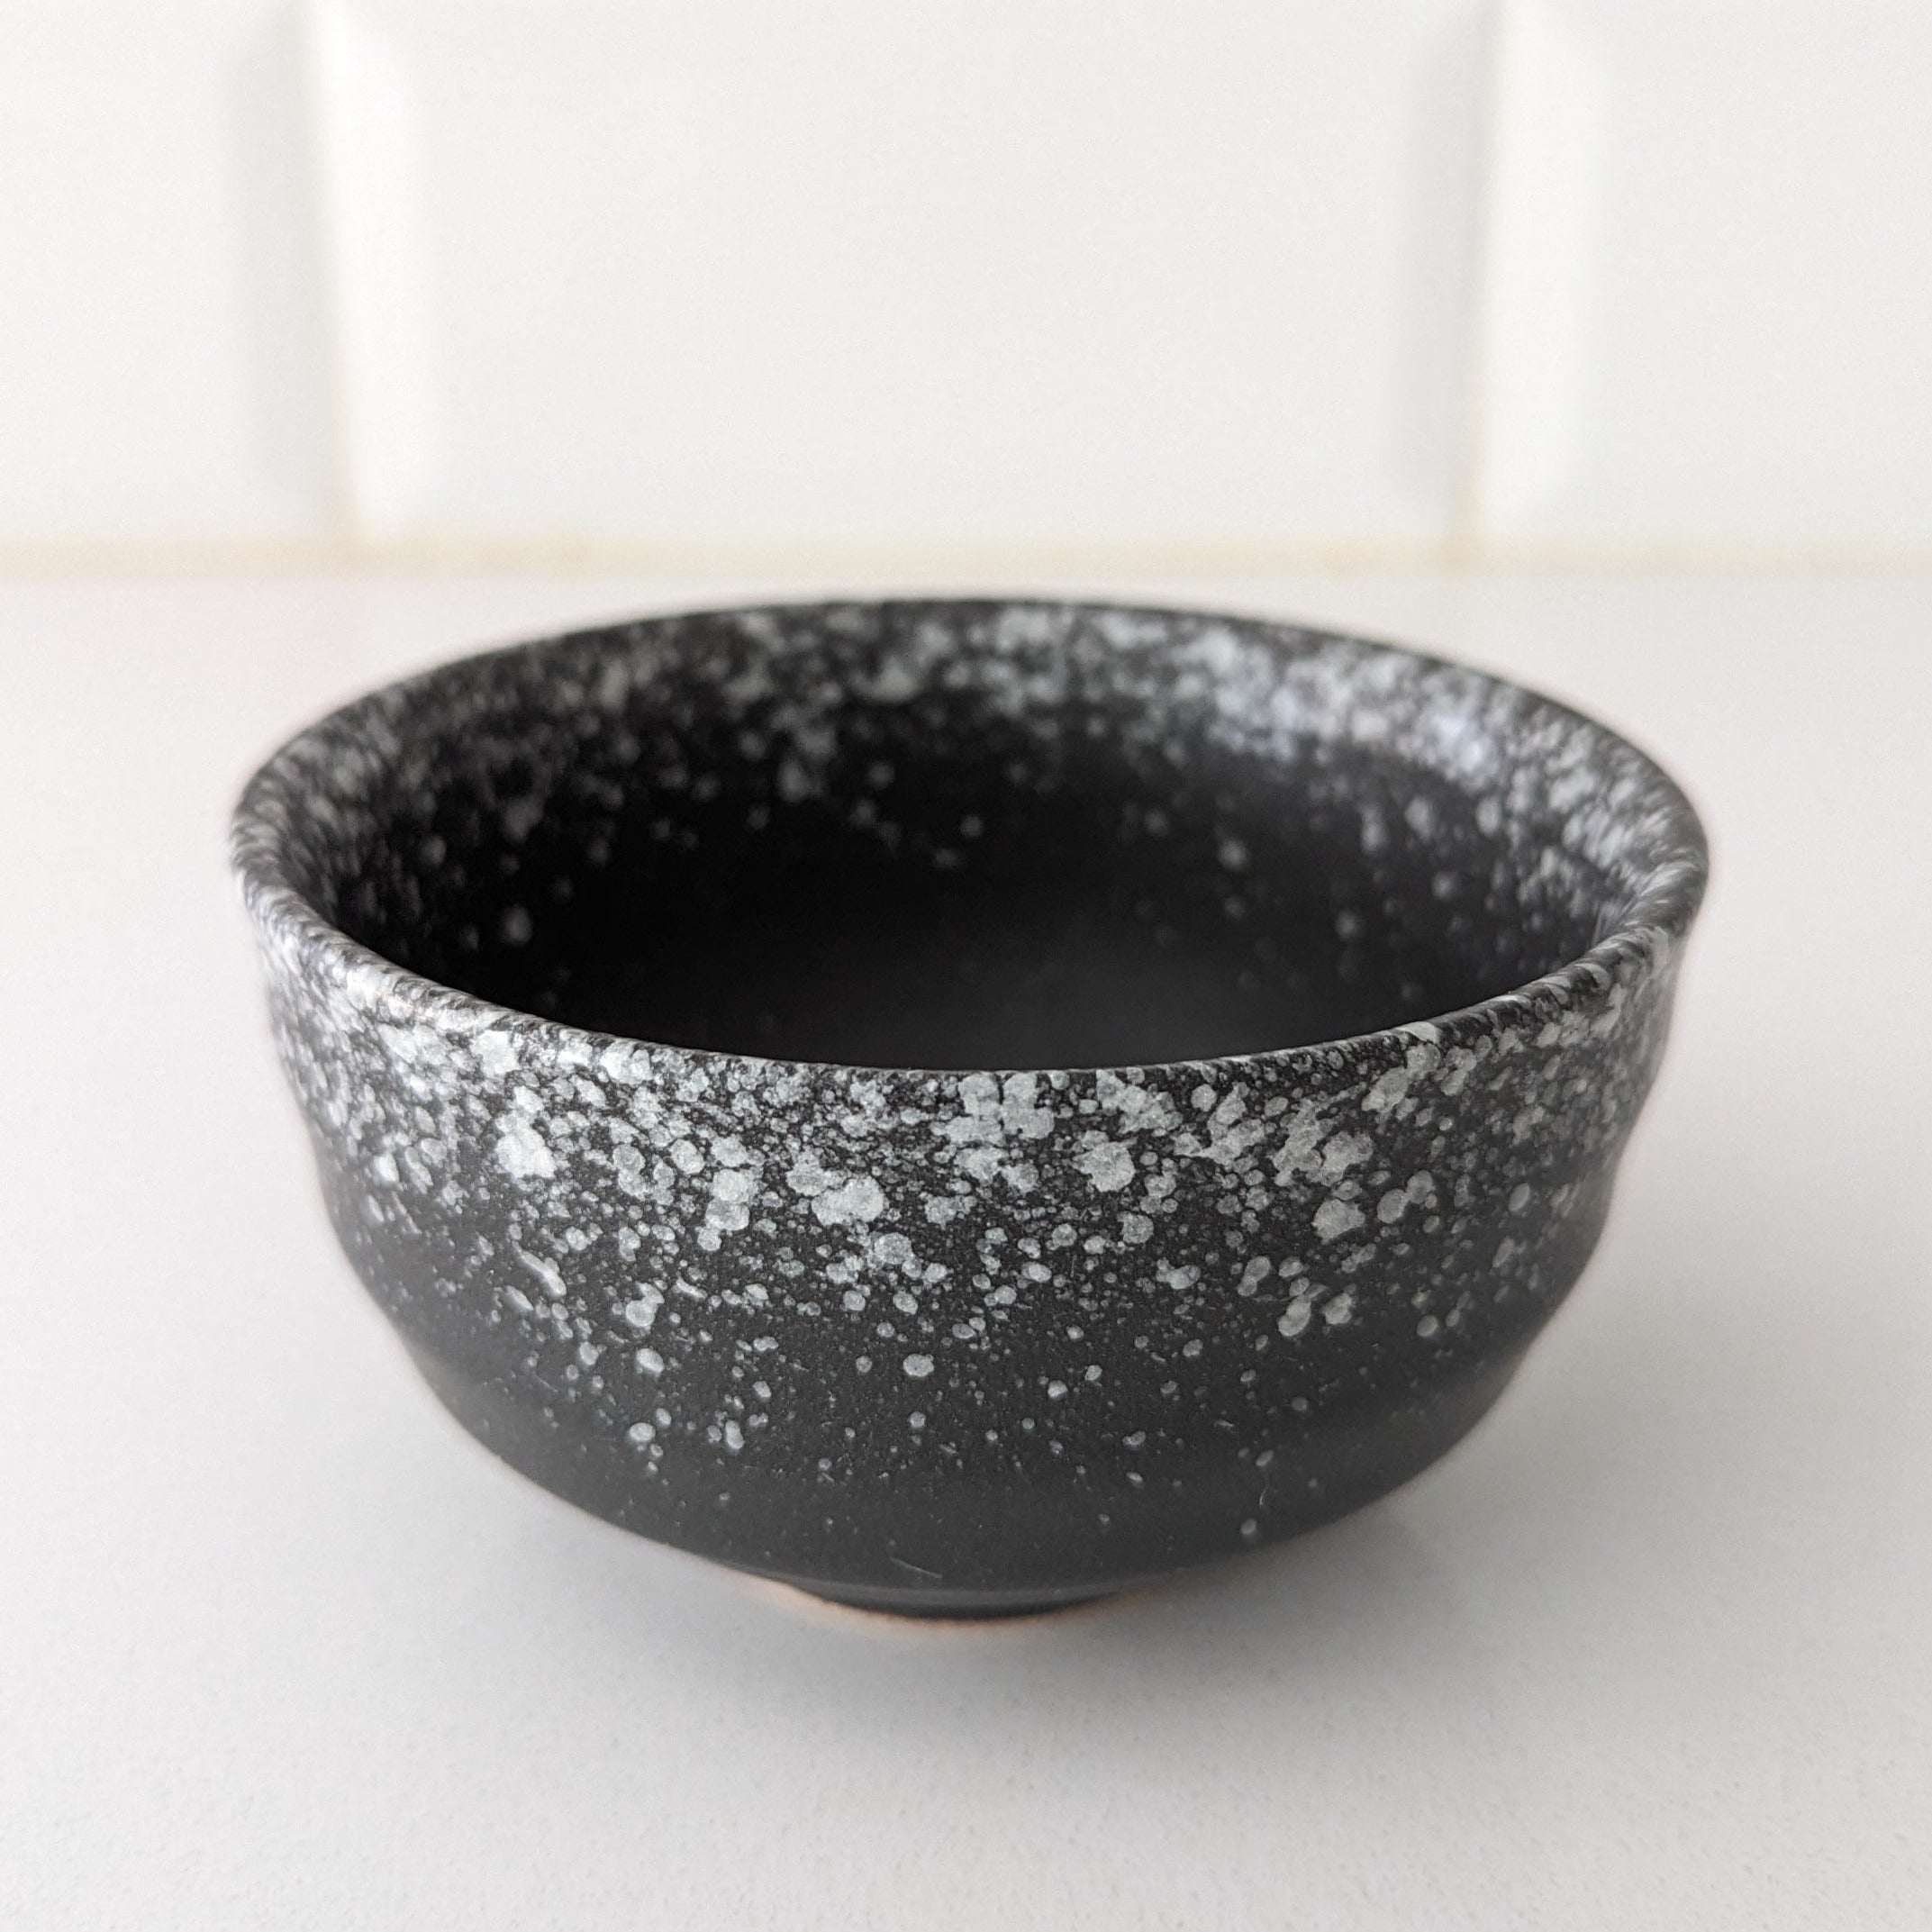 Matcha Bowl (or Chawan) in Grey with White Speckles. Part of the Matcha Green Tea Gift Set from Very Craftea